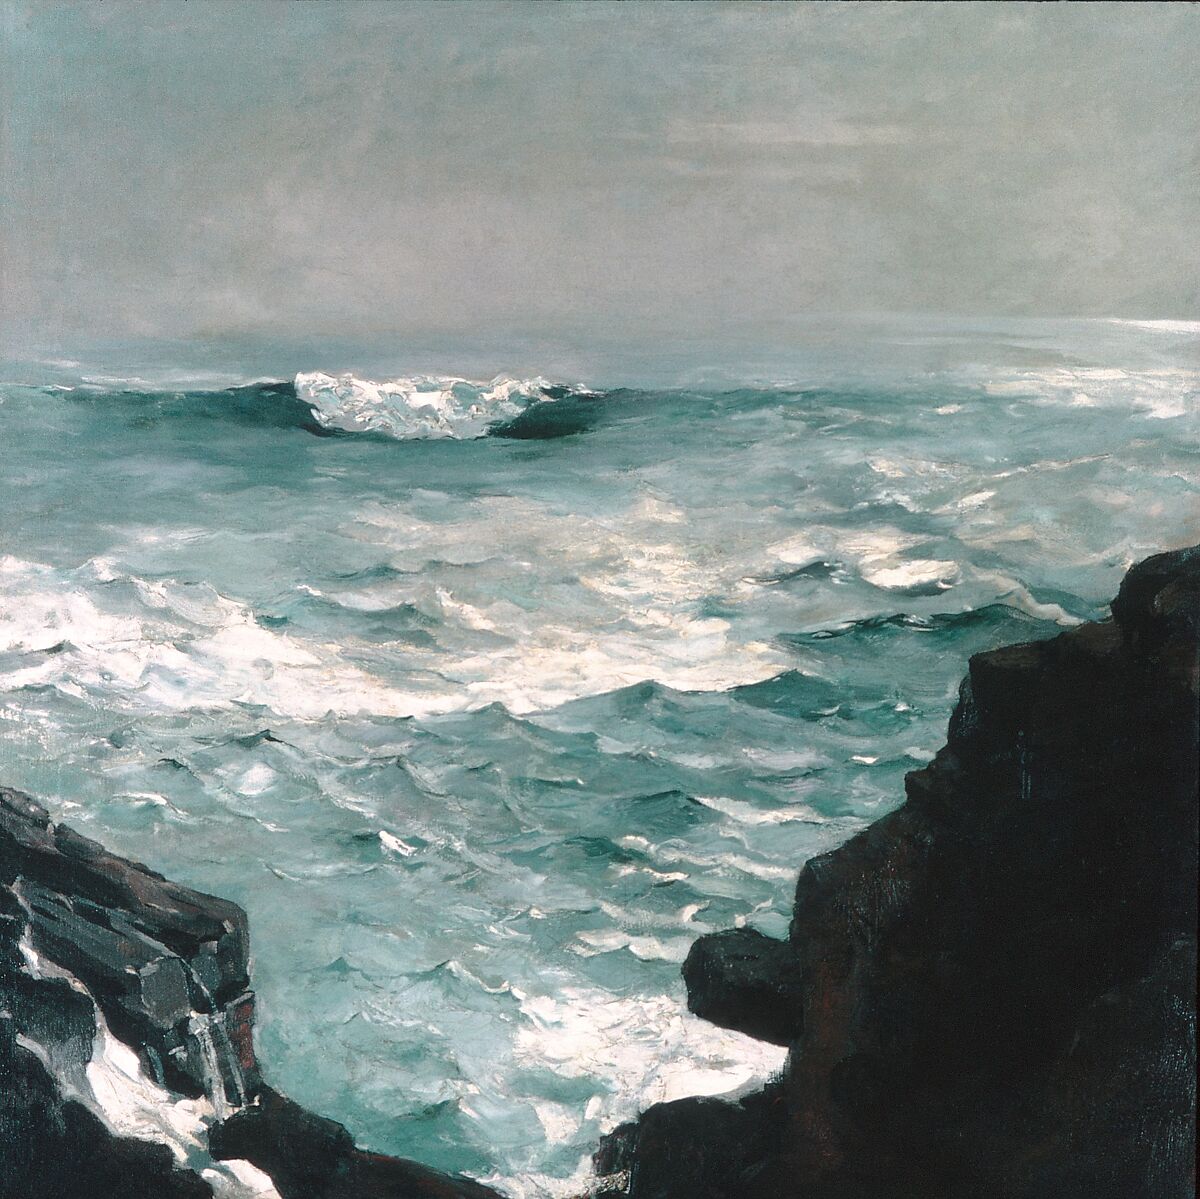 Cannon Rock, Winslow Homer, Oil on canvas, American